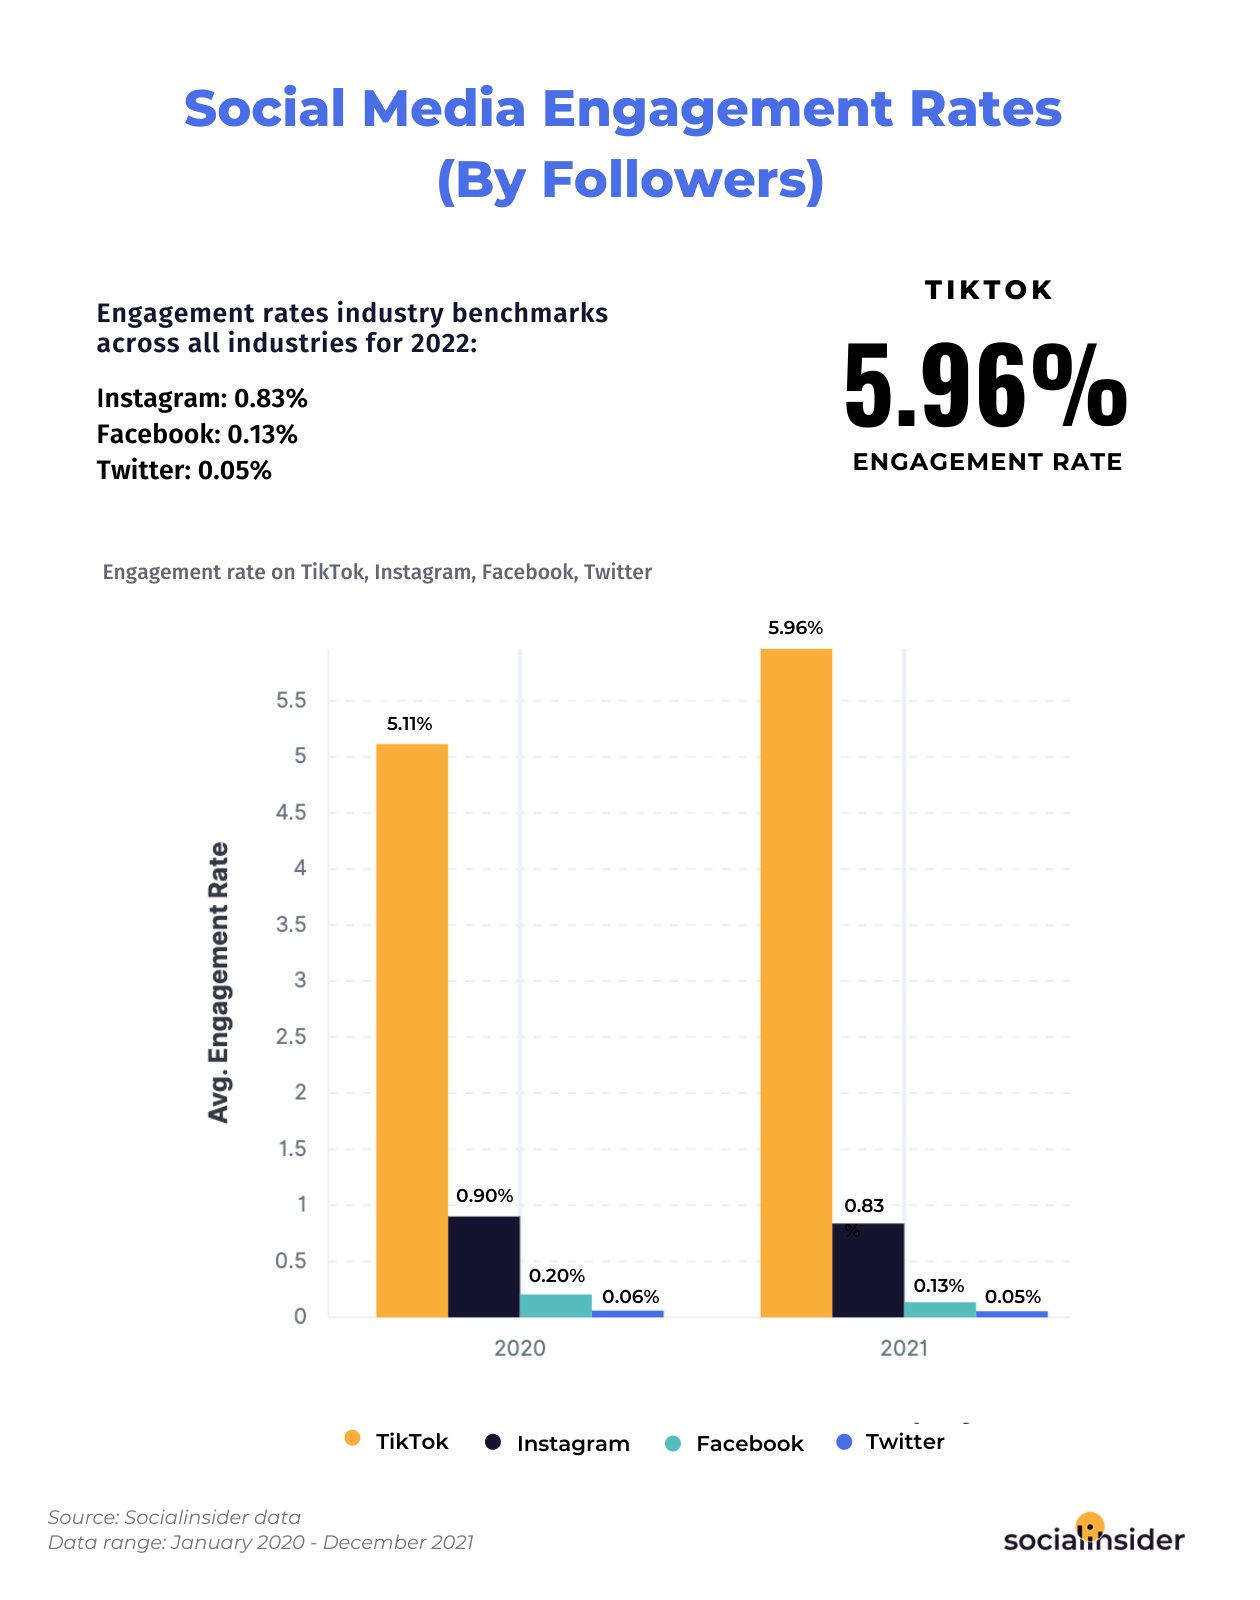 Social media engagement rate stats for different platforms - benchmarks for 2022.